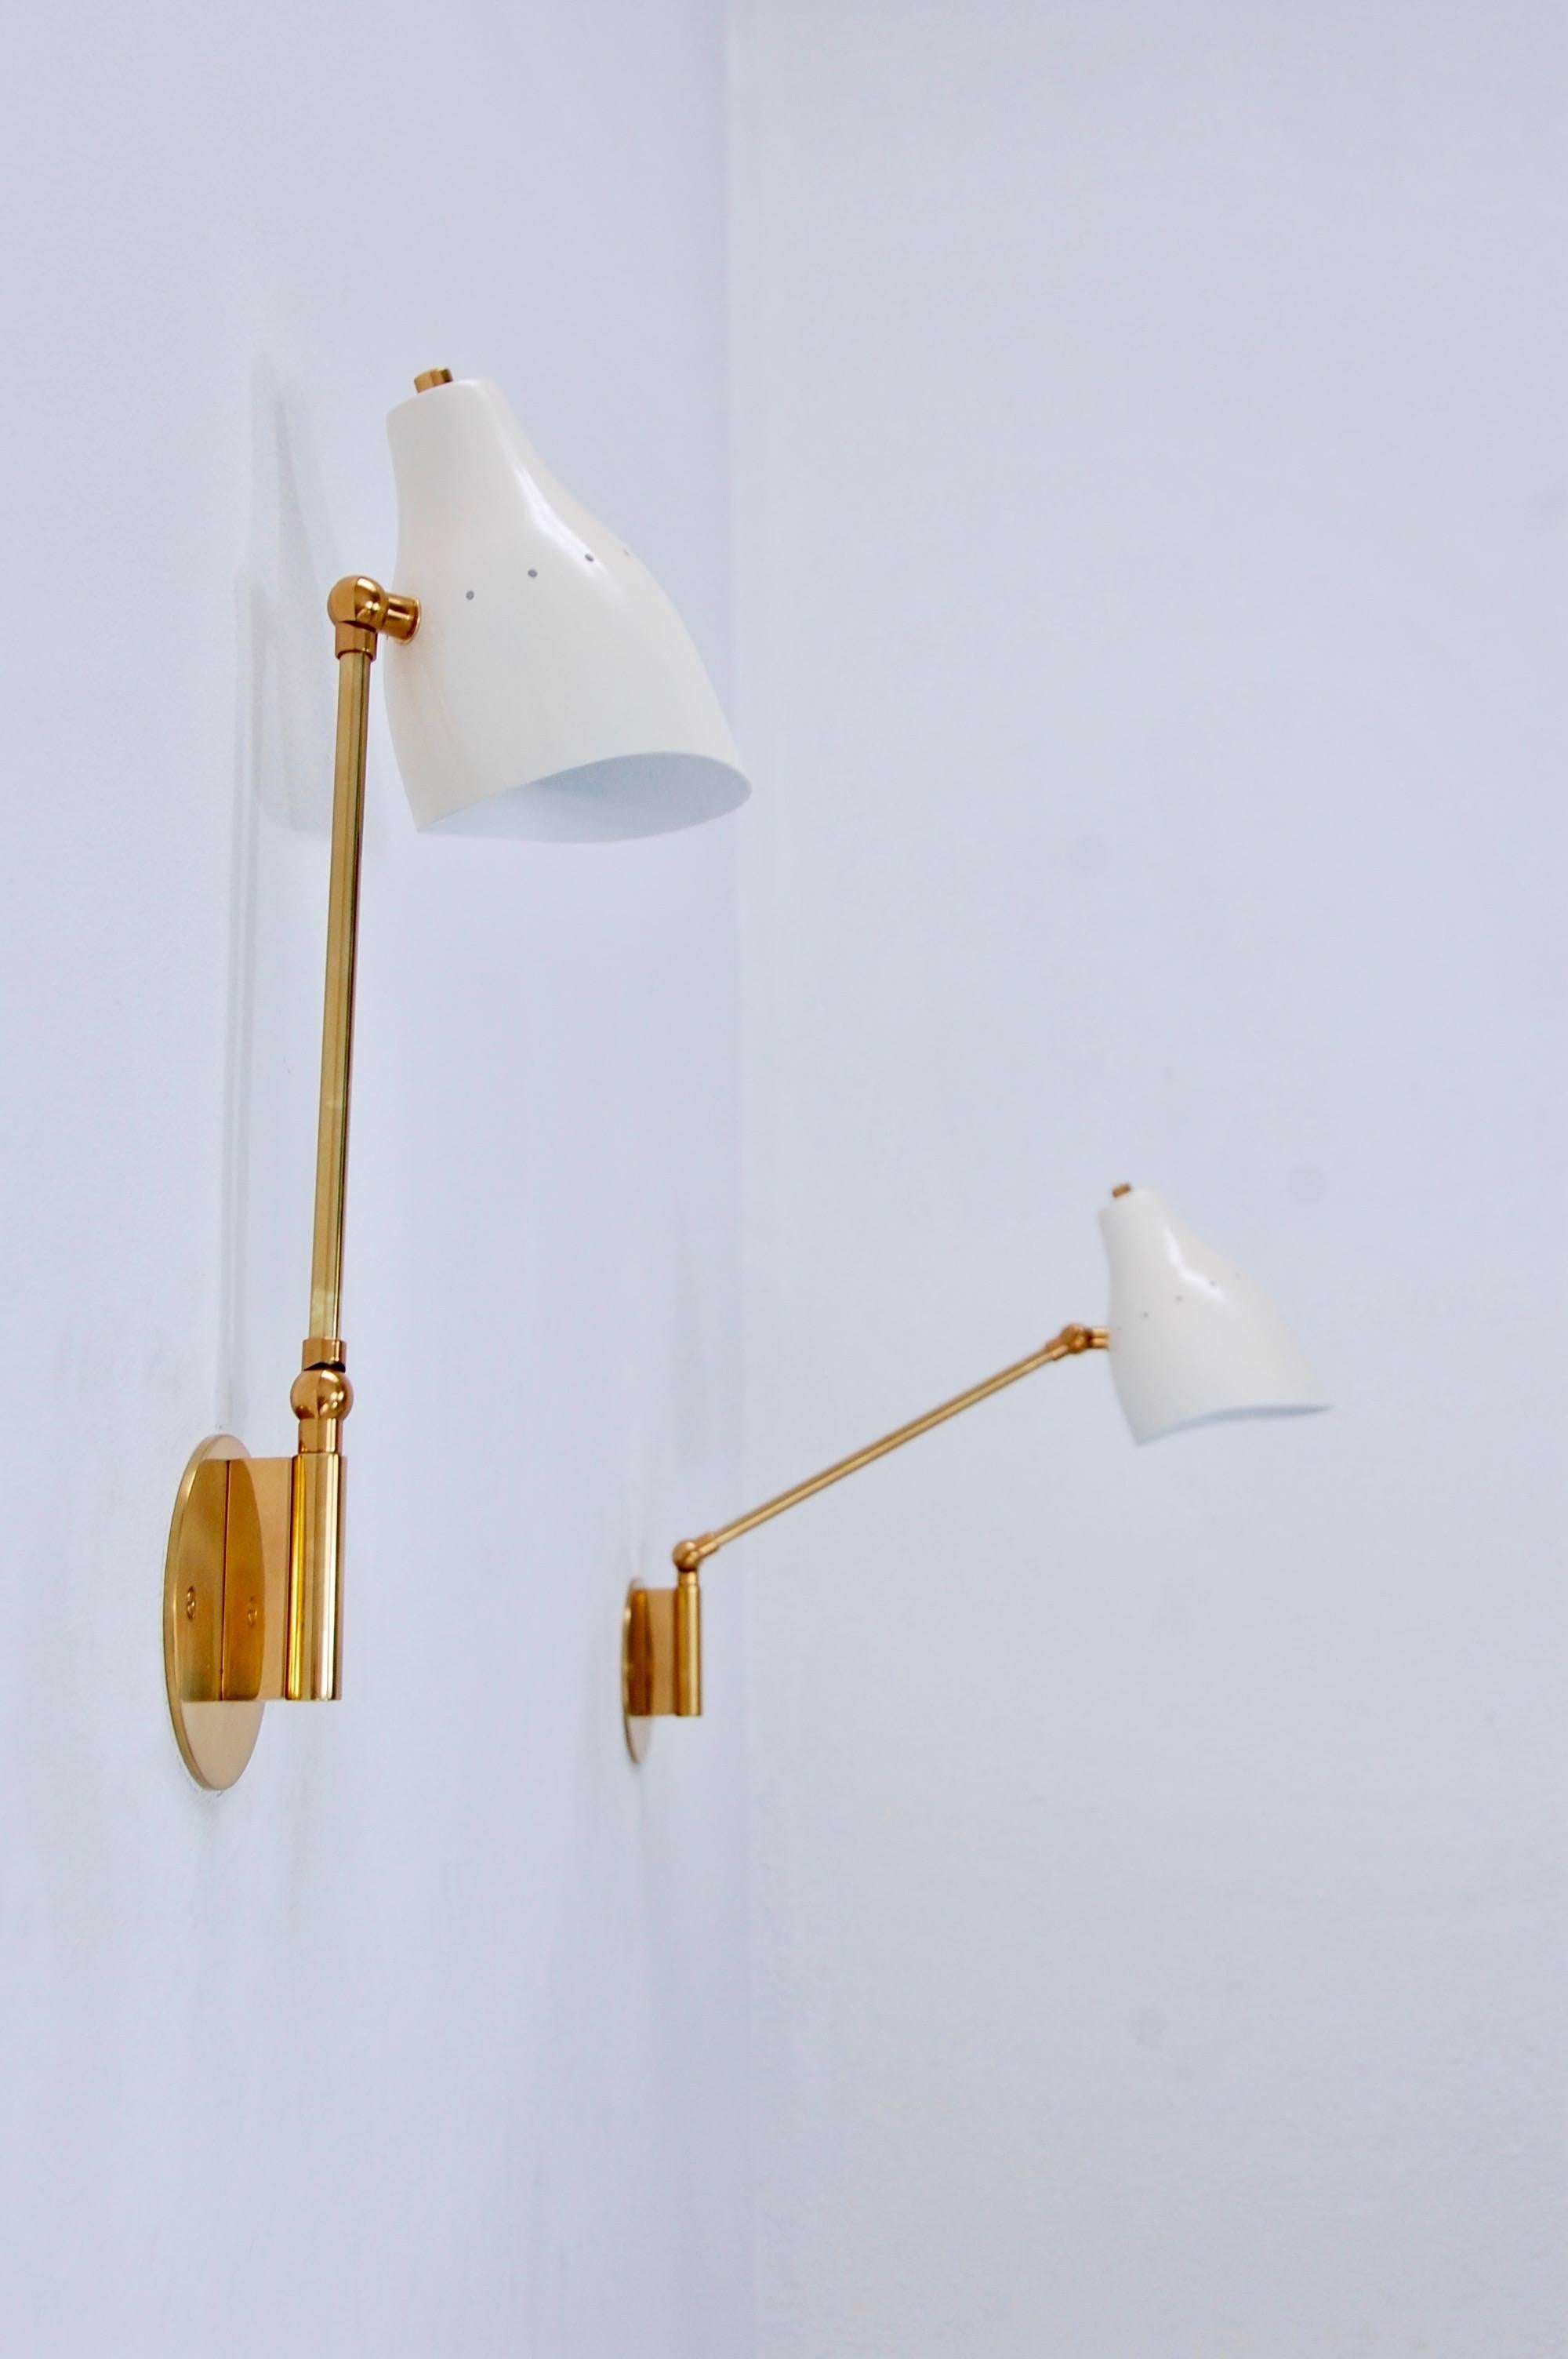 A foldable and swing version of our original LUread Sconce with a foldable and swingable articulated arm to allow for more variance in light direction. Made from solid brass and a hand-painted aluminum shade. Custom colors and dimensions available